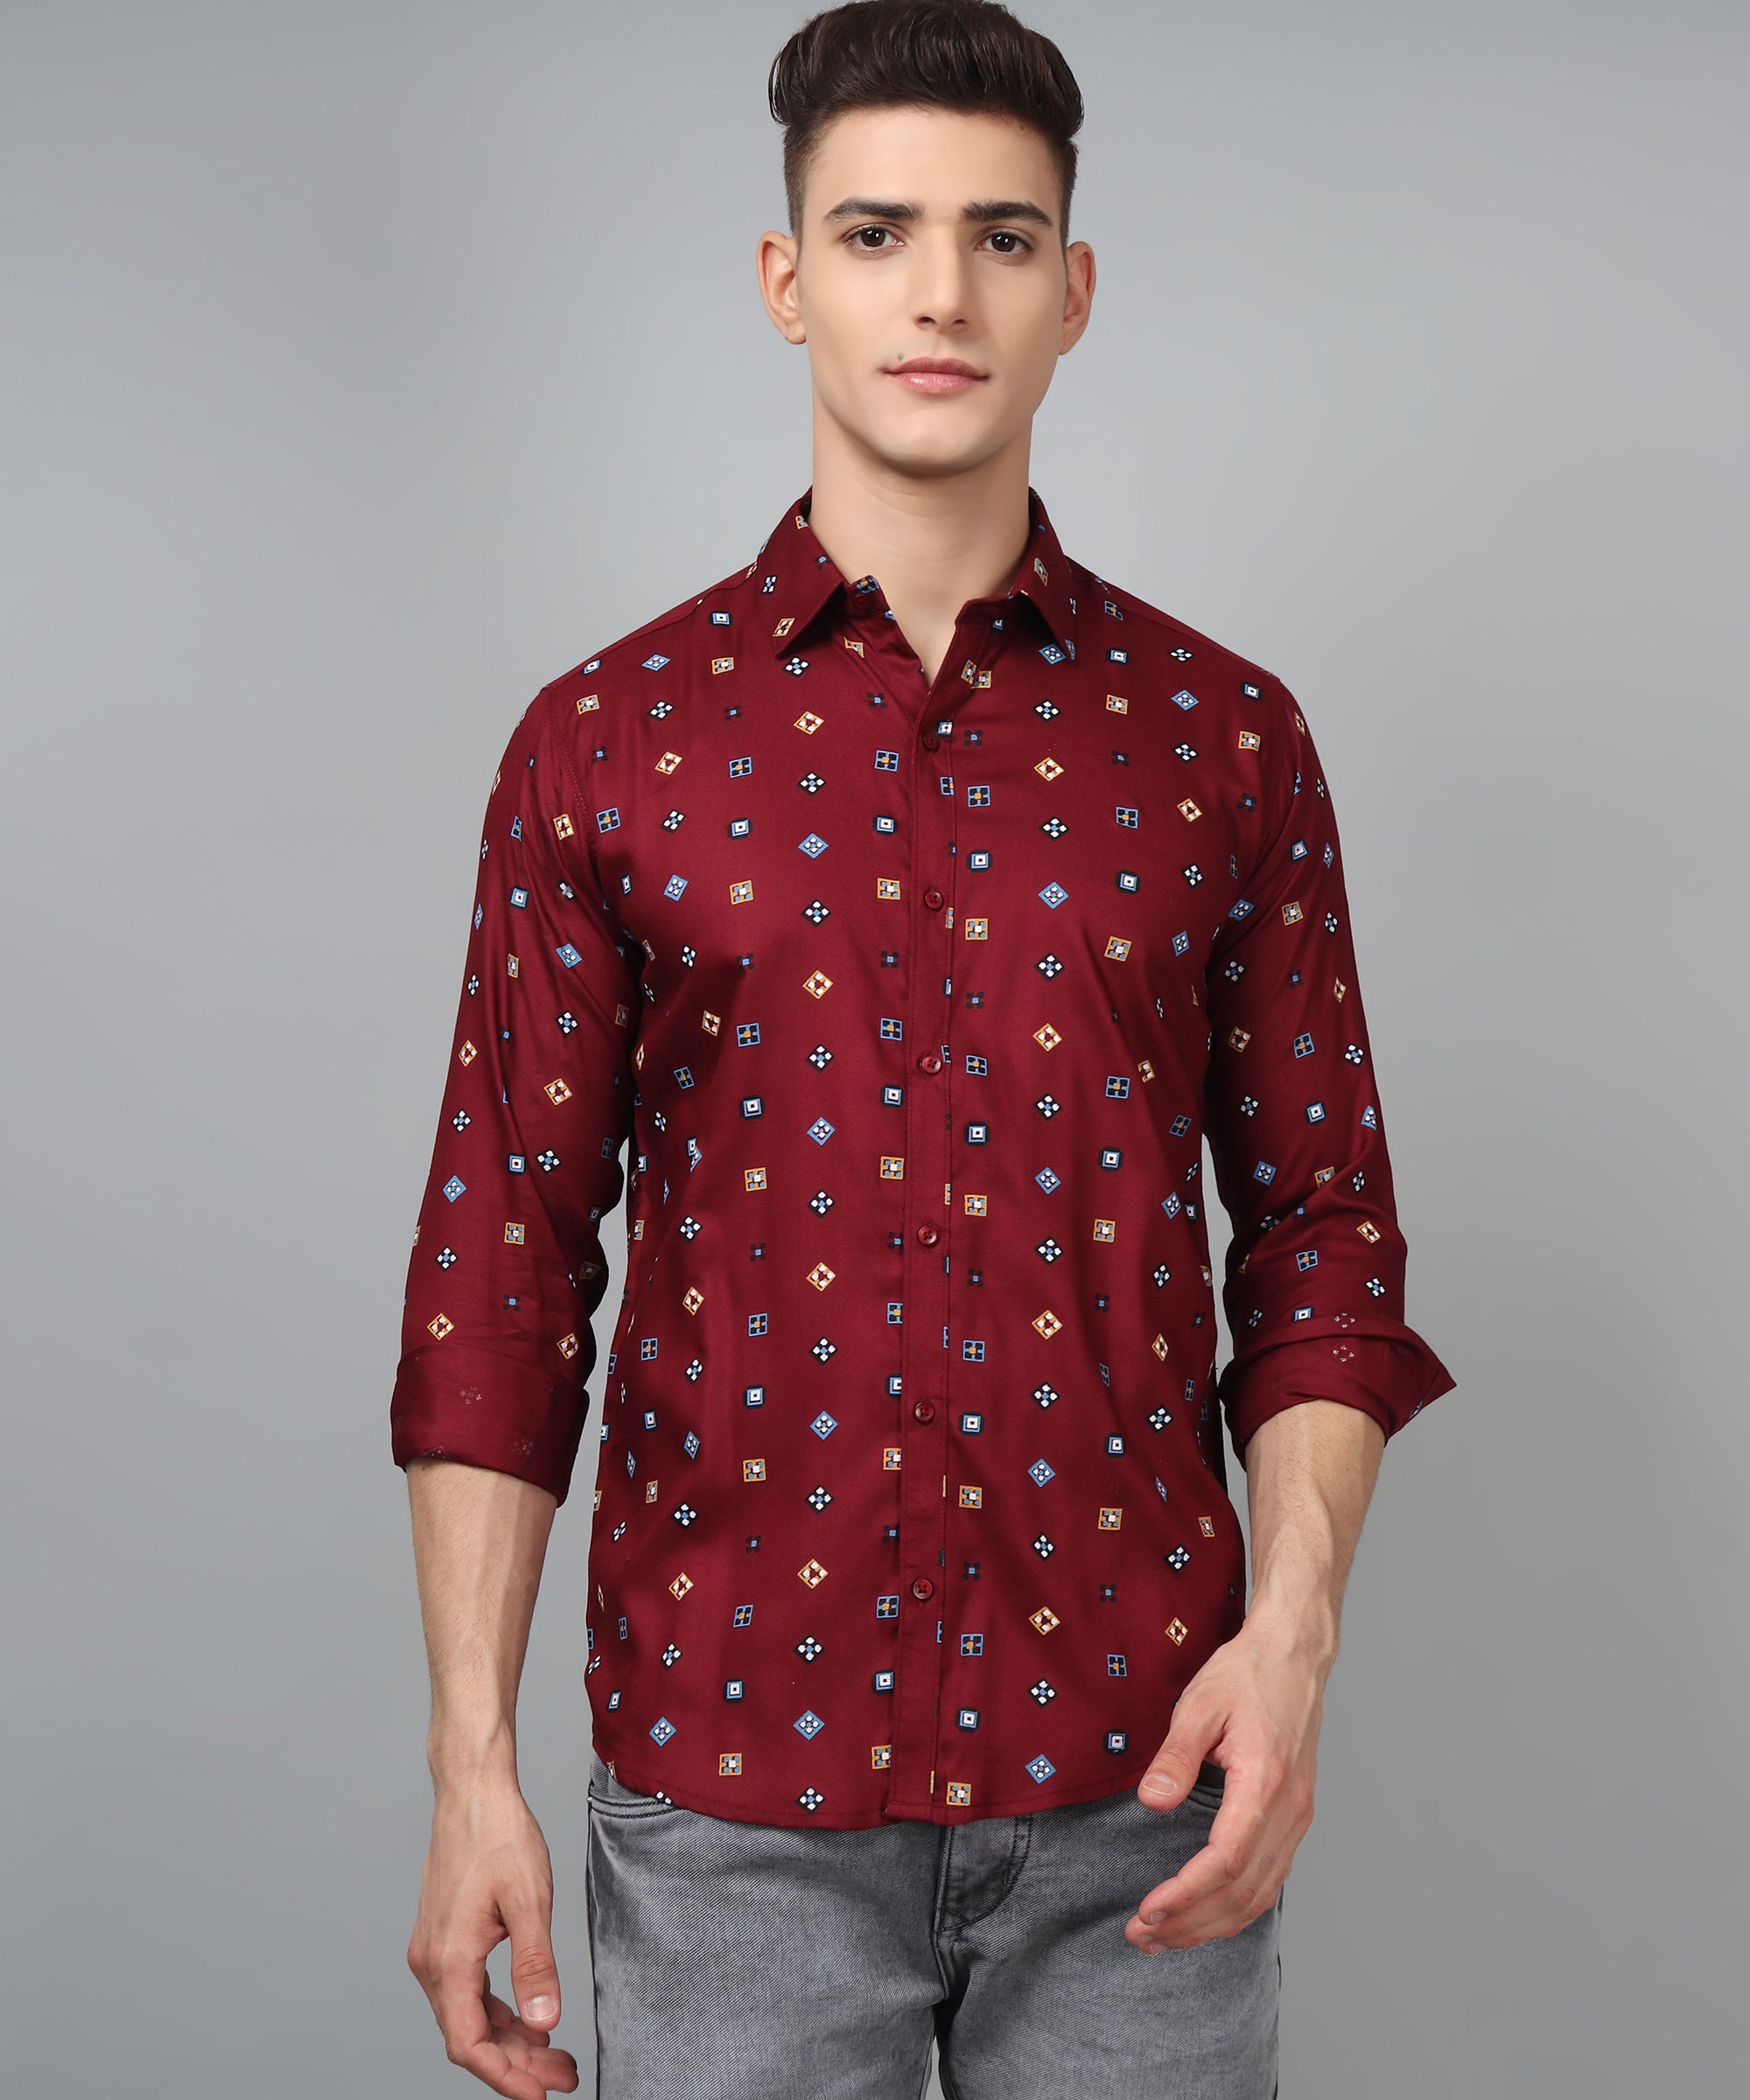 What is the primary material used in Oxford cotton shirts?